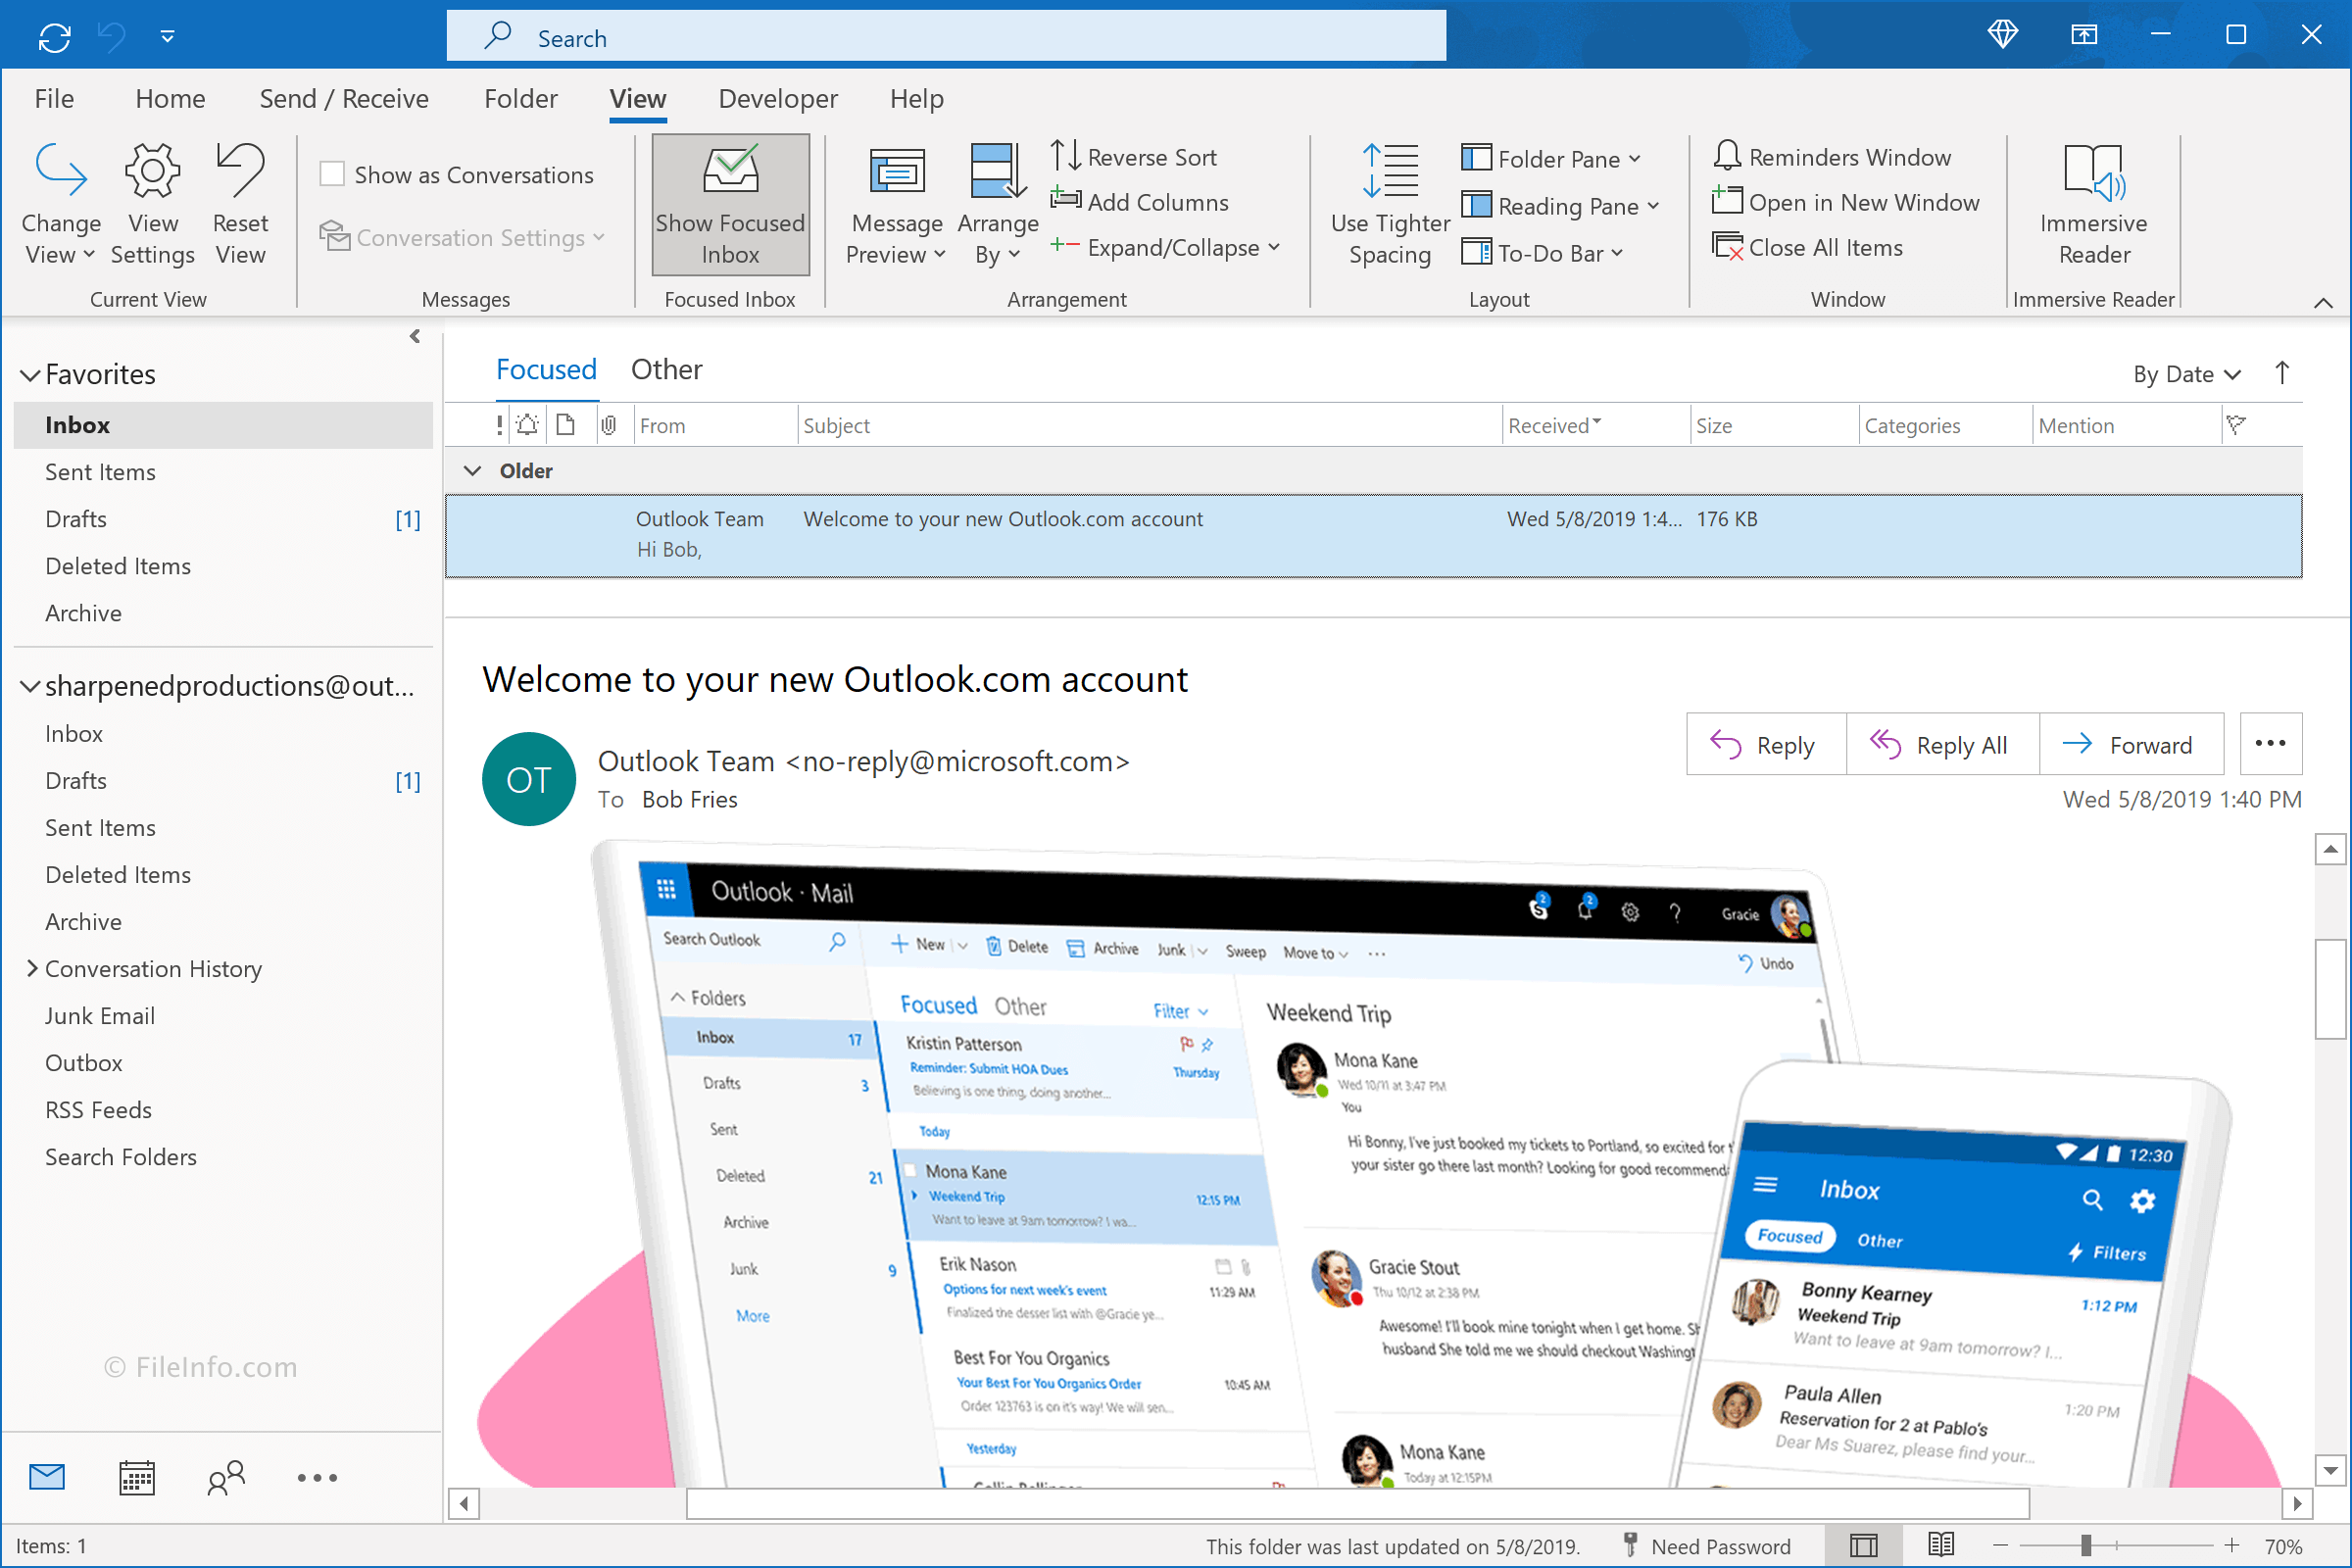 Microsoft Outlook 365 Overview and Supported File Types